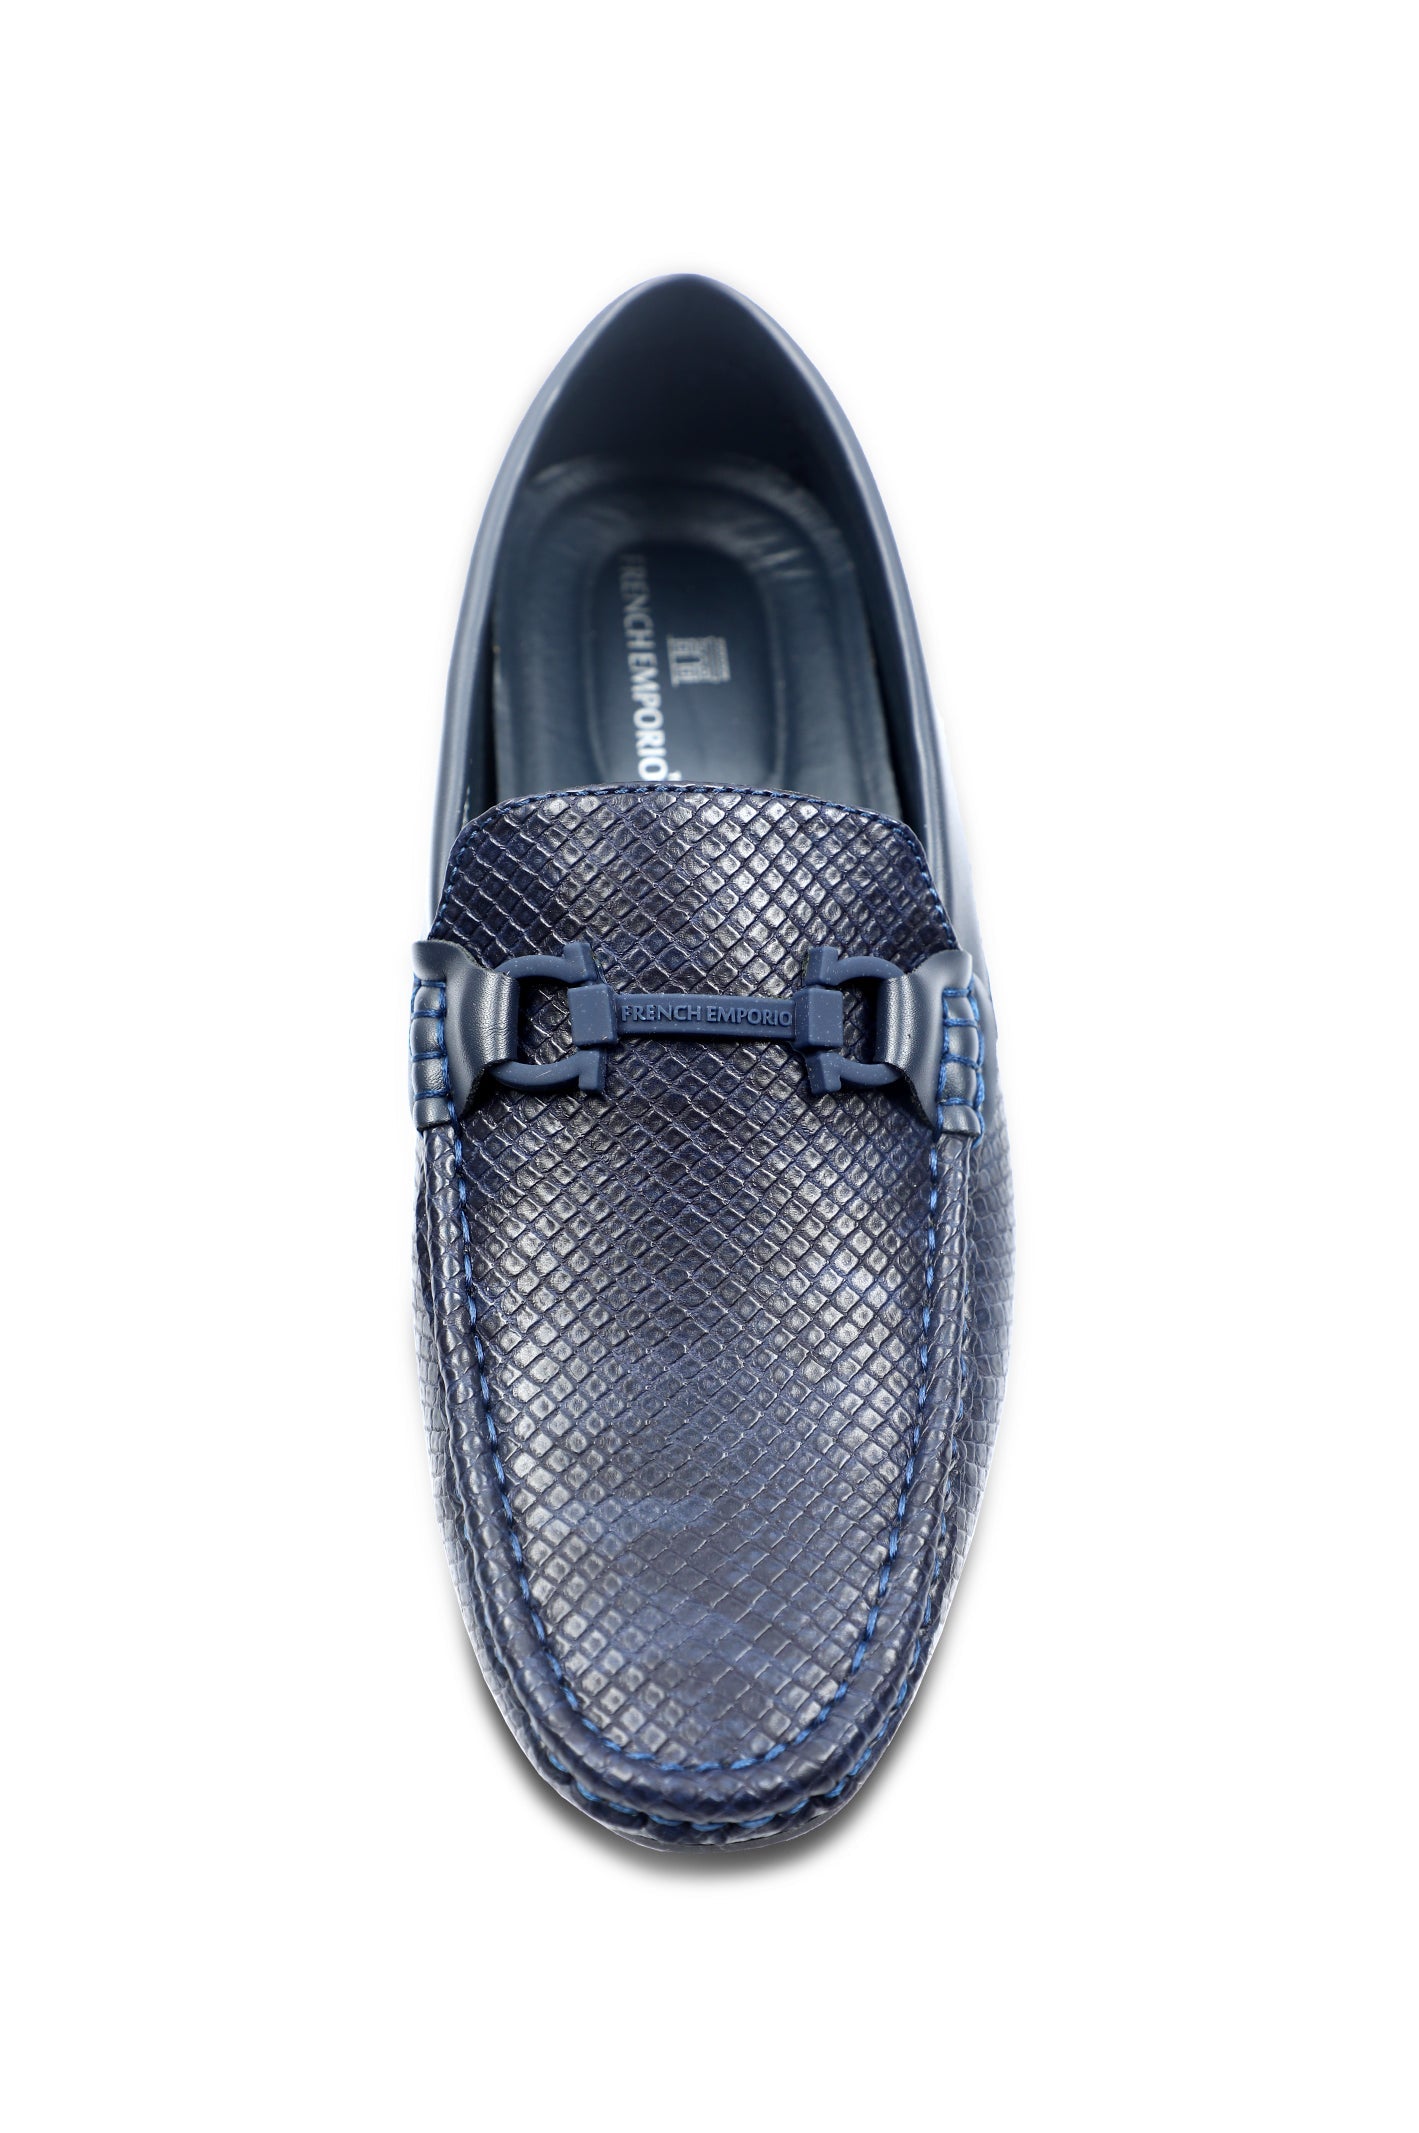 Casual Shoes For Men in Navy SKU: SMC-0068-NAVY - Diners